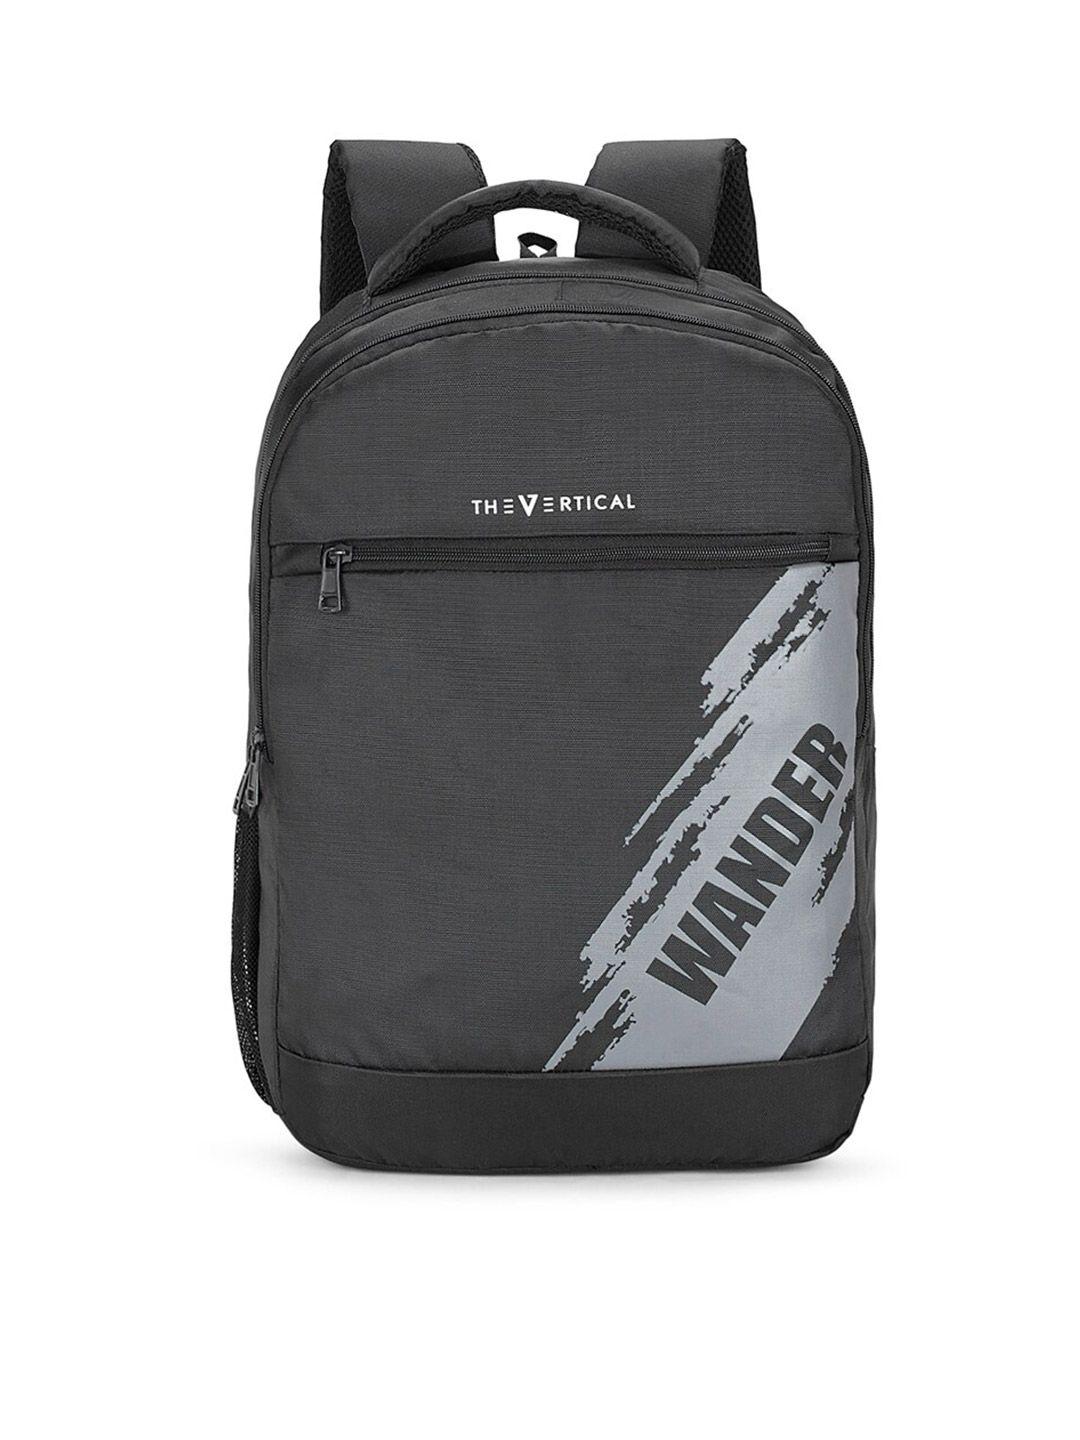 THe VerTicaL Unisex Typography Backpack